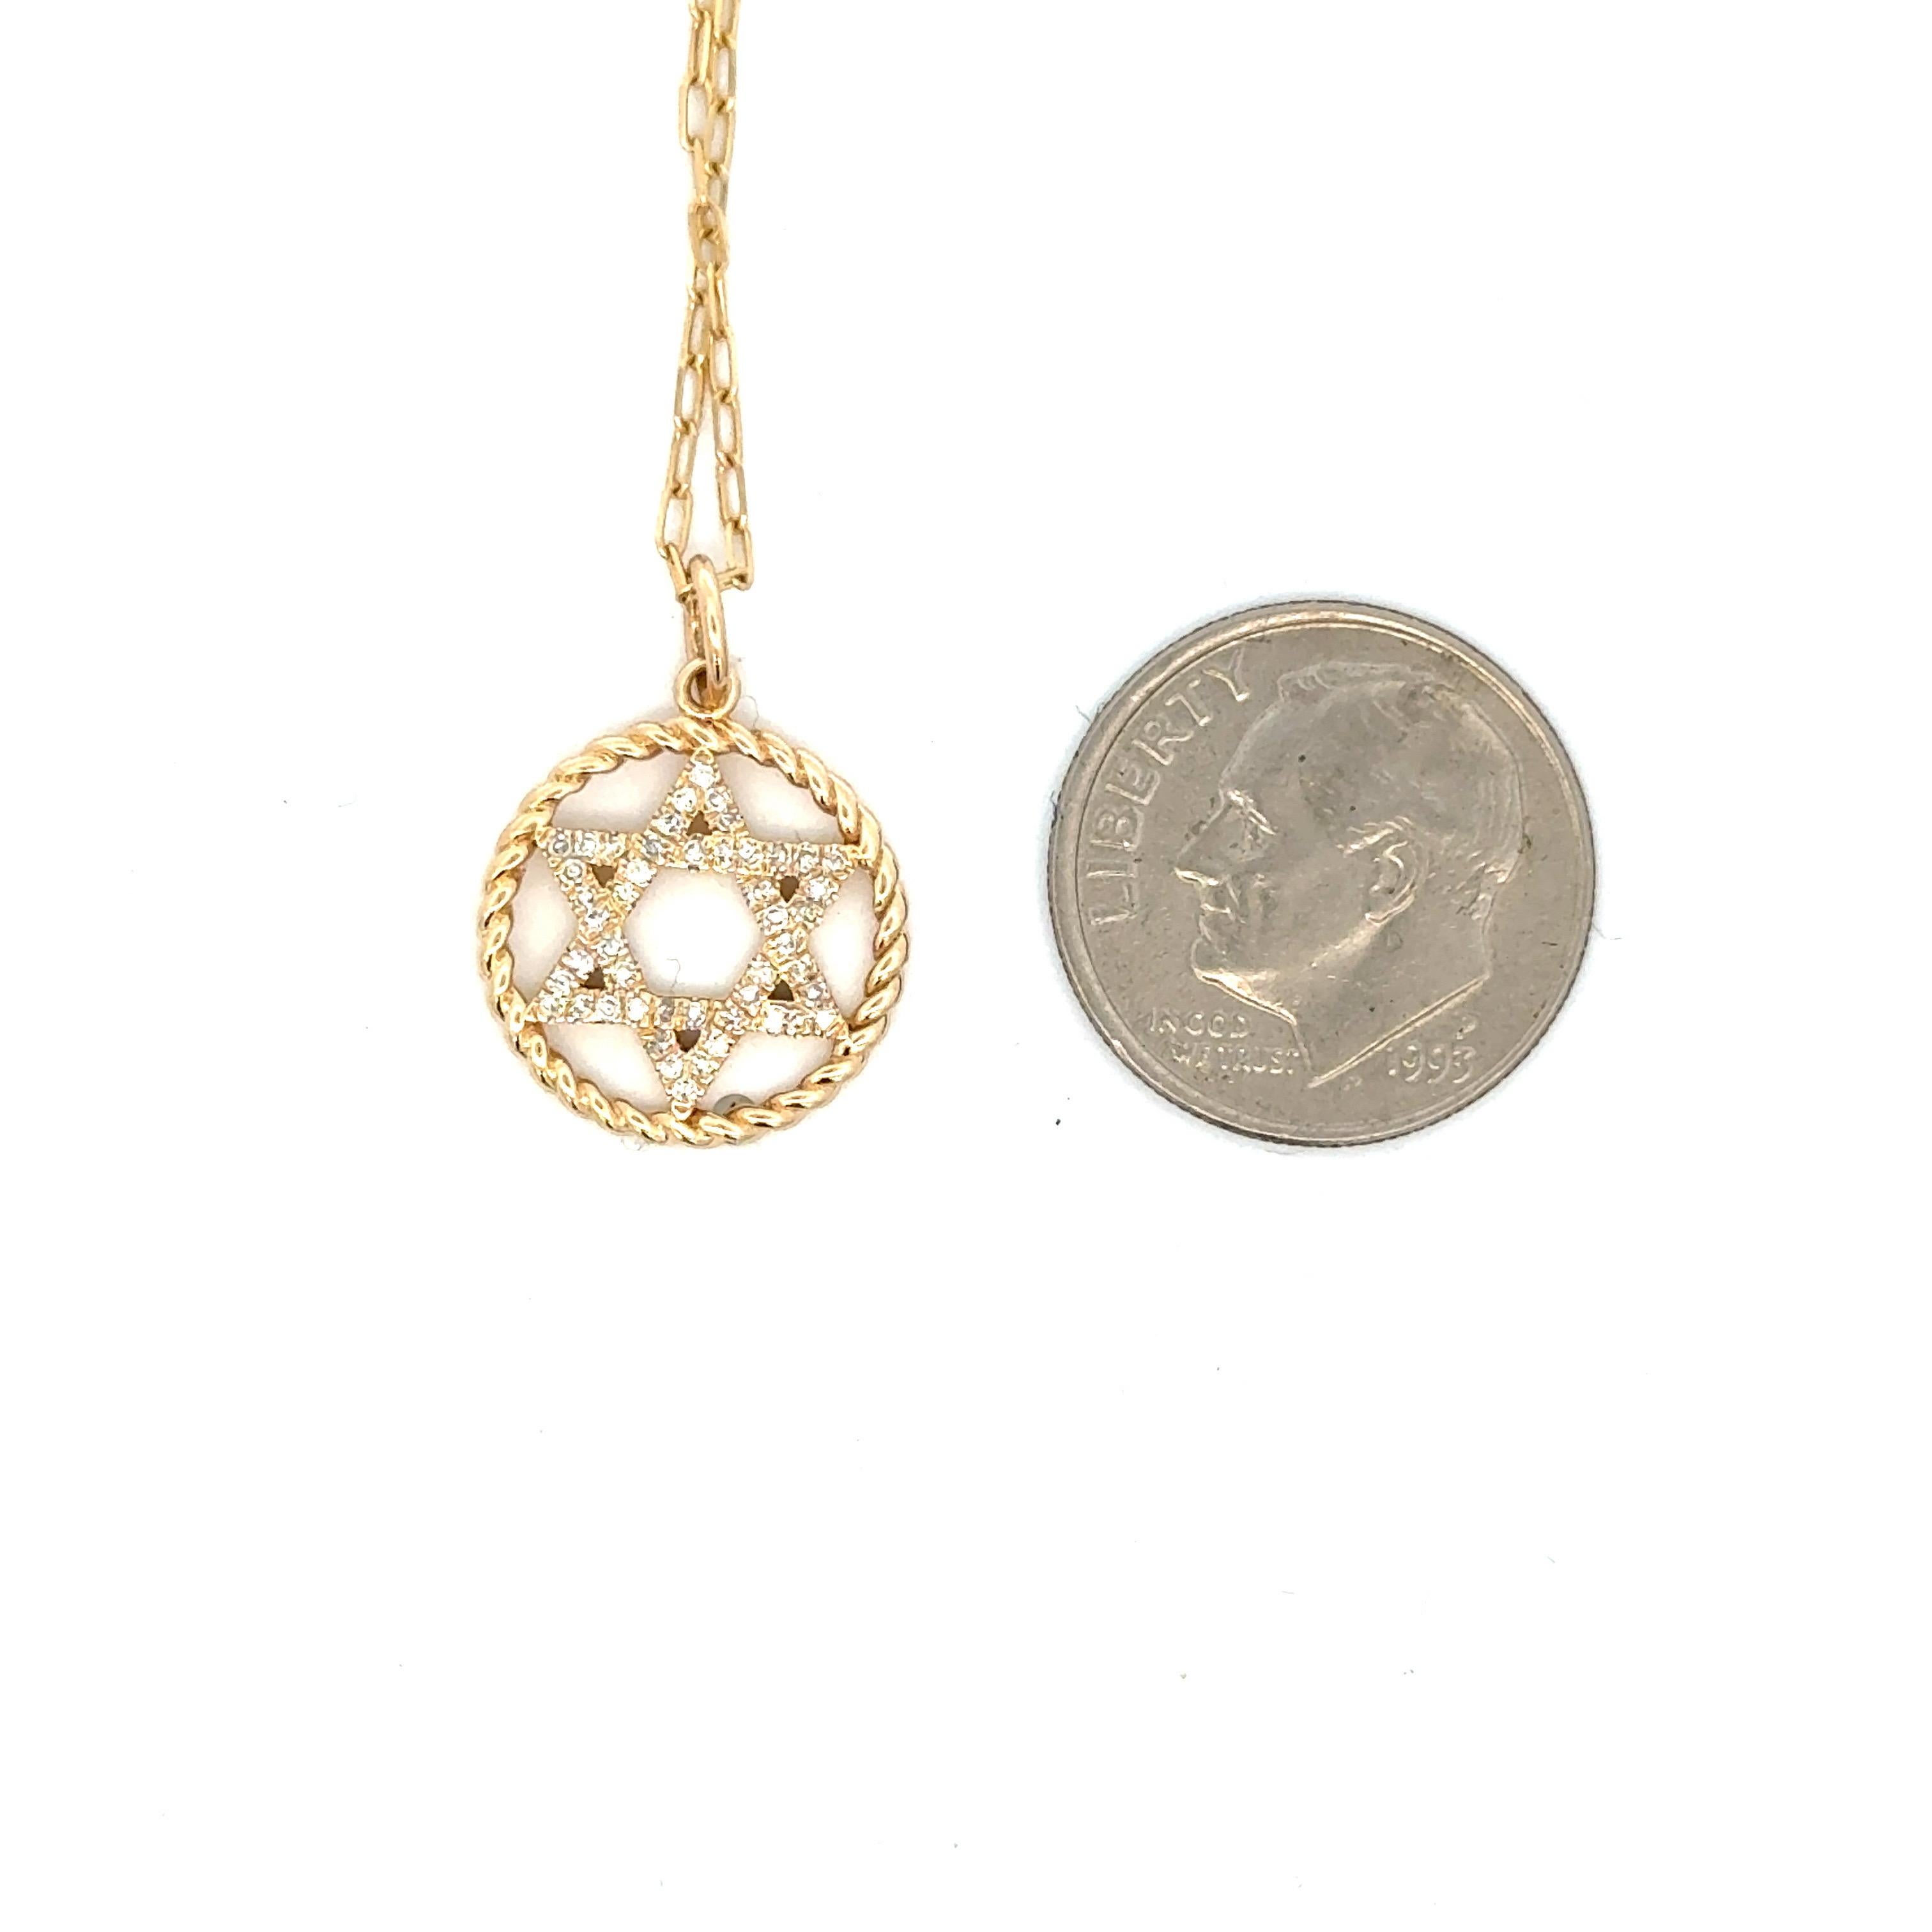 Star of David pendant featuring round brilliants weighing 0.12 carats with a twist motif halo.